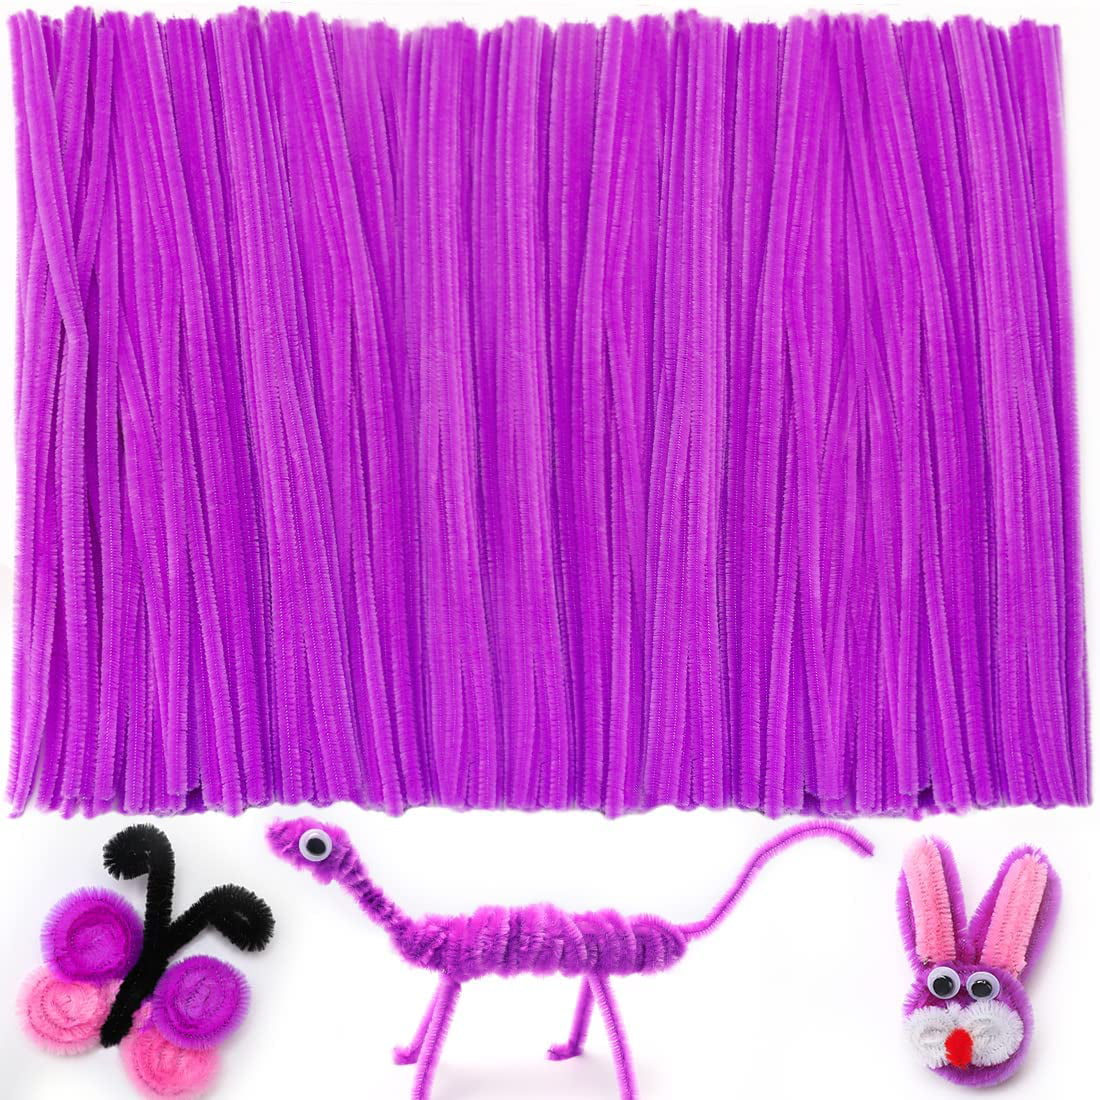 200psc Brown Pipe Cleaners, Chenille Stems, Pipe Cleaners for